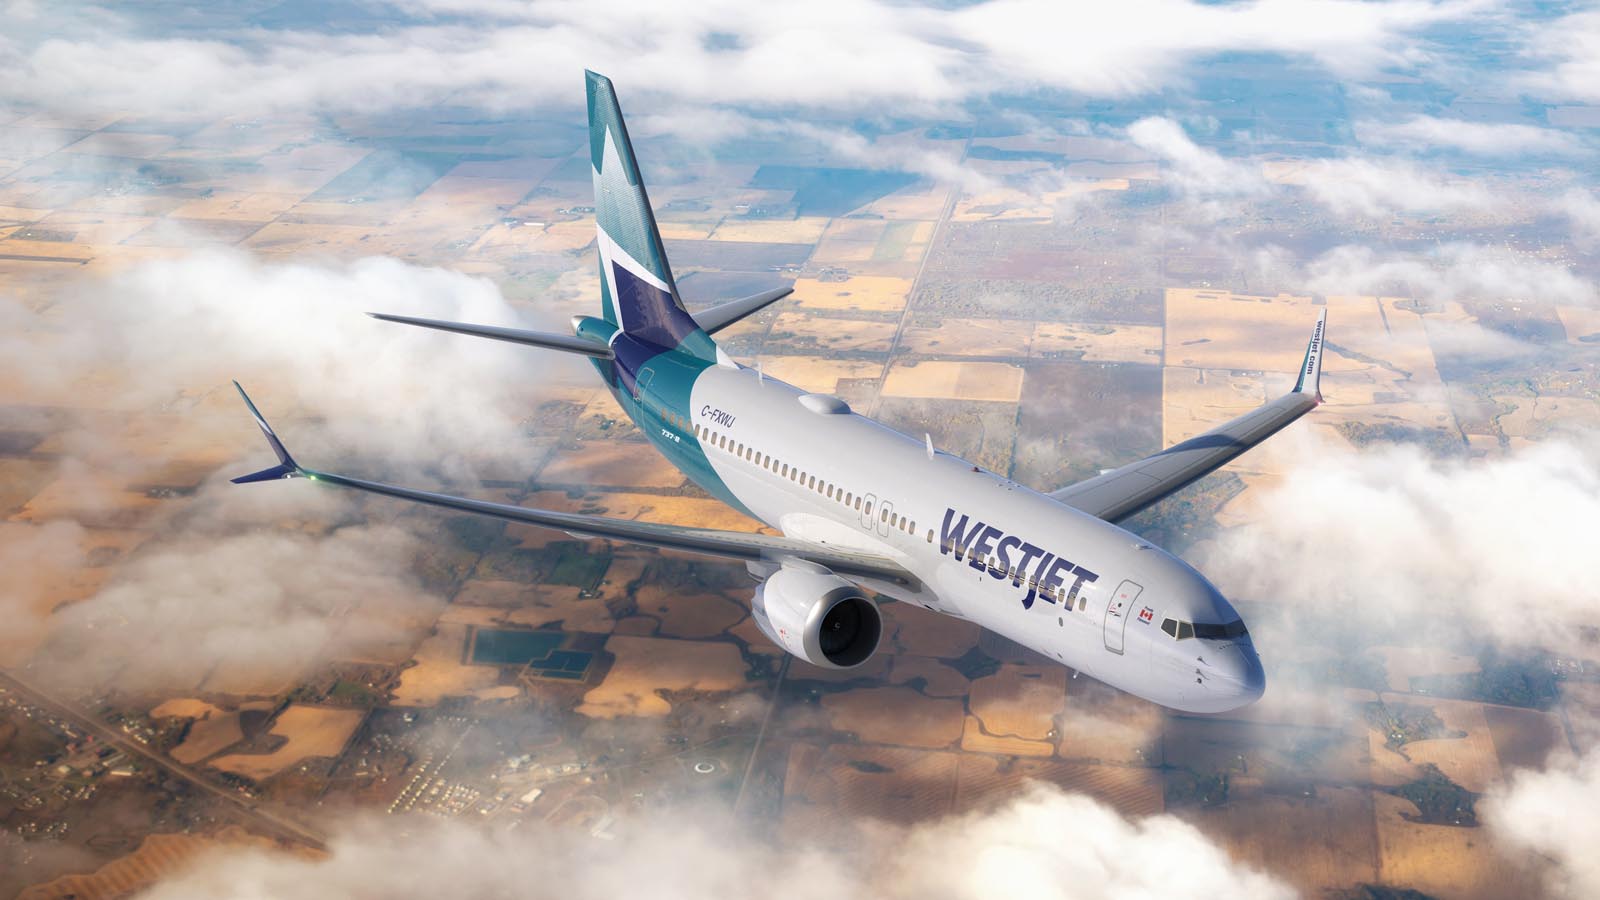 WestJet Boeing MAX 8 aircraft flying over Canadian prairies